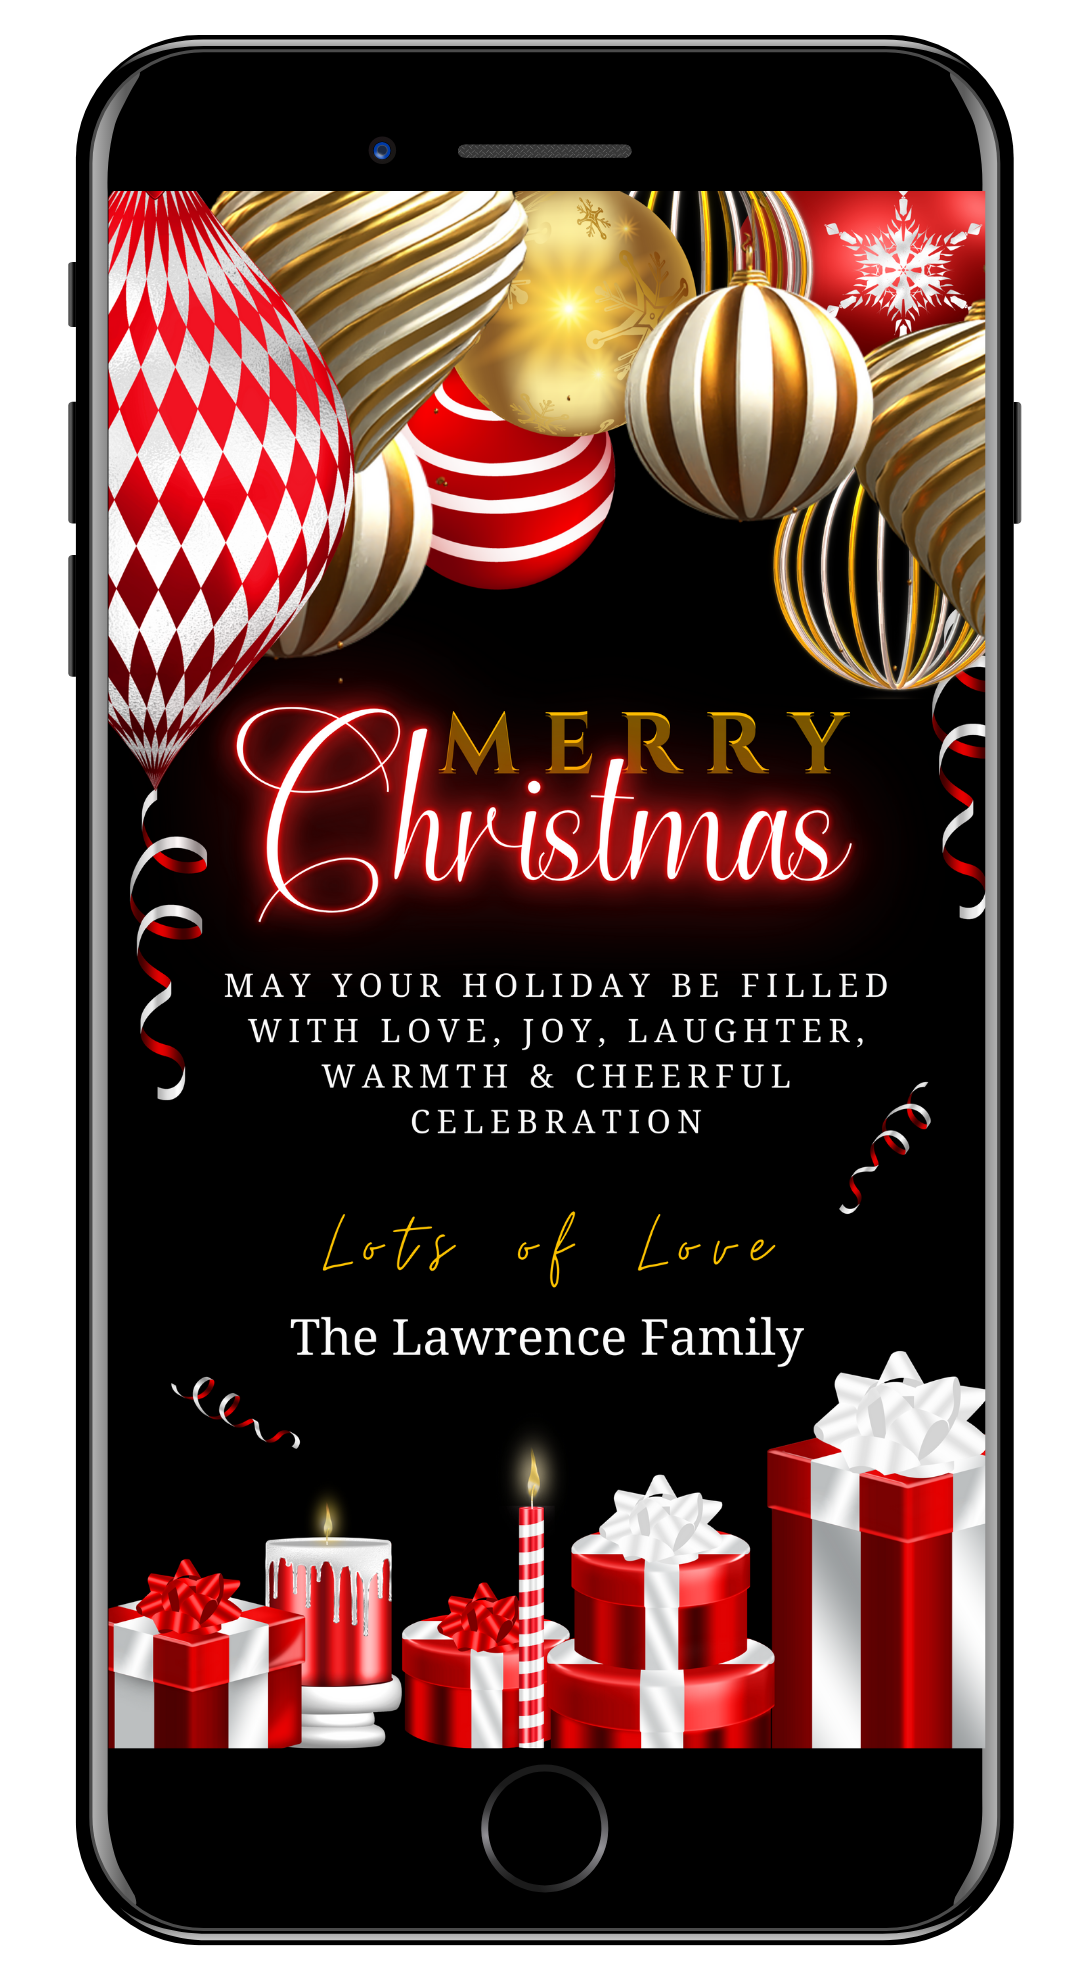 Gold Red Neon Presents | Merry Christmas Greeting Ecard displayed on a smartphone screen with festive balloons, gifts, and ornaments.